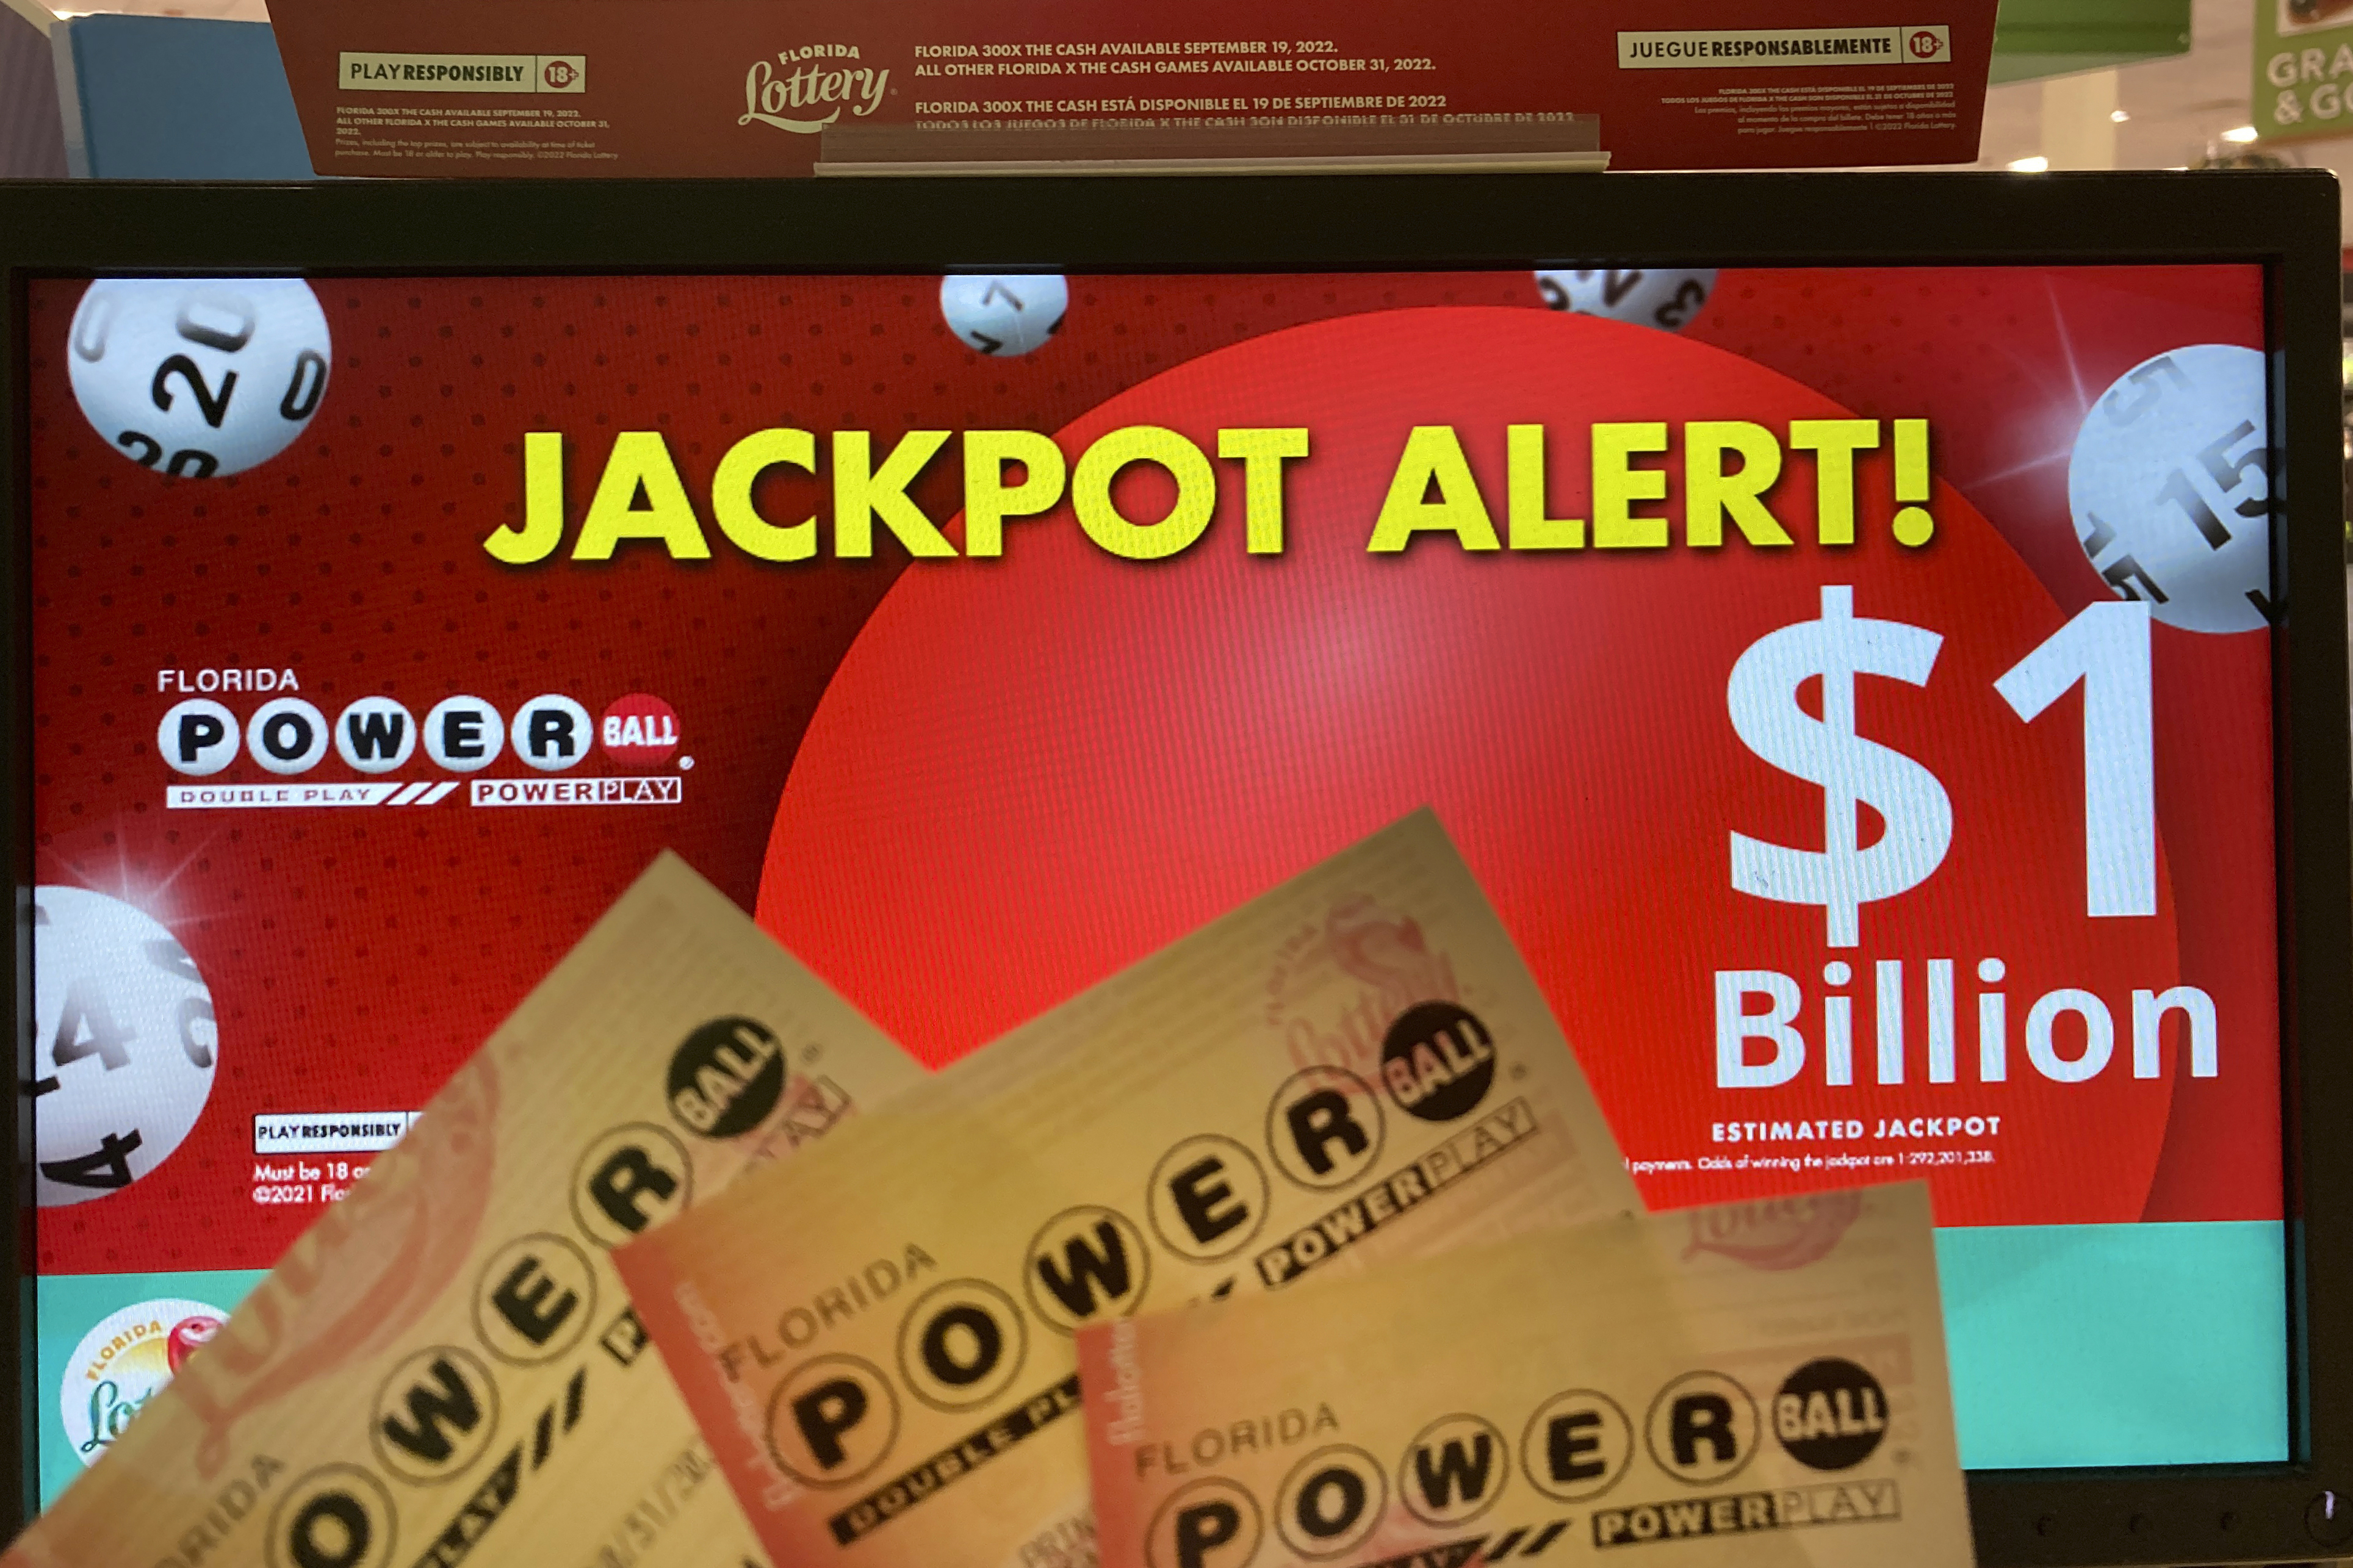 Powerball jackpot hits $1 billion. What would you take home in